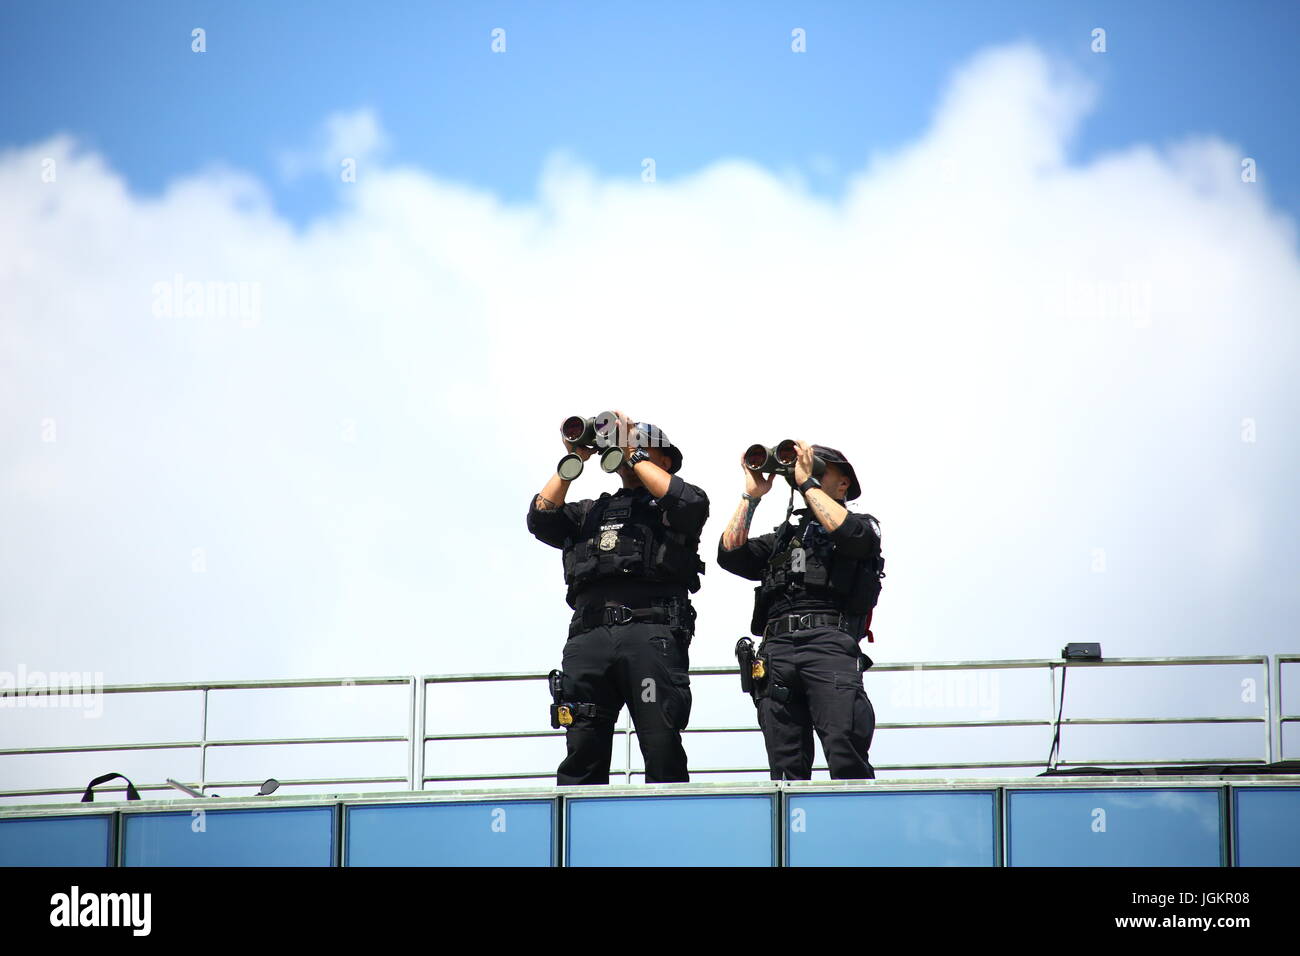 Warsaw, Poland, July 6th, 2017: Snipers of special police forces observing area before US President Trump arrives. Stock Photo